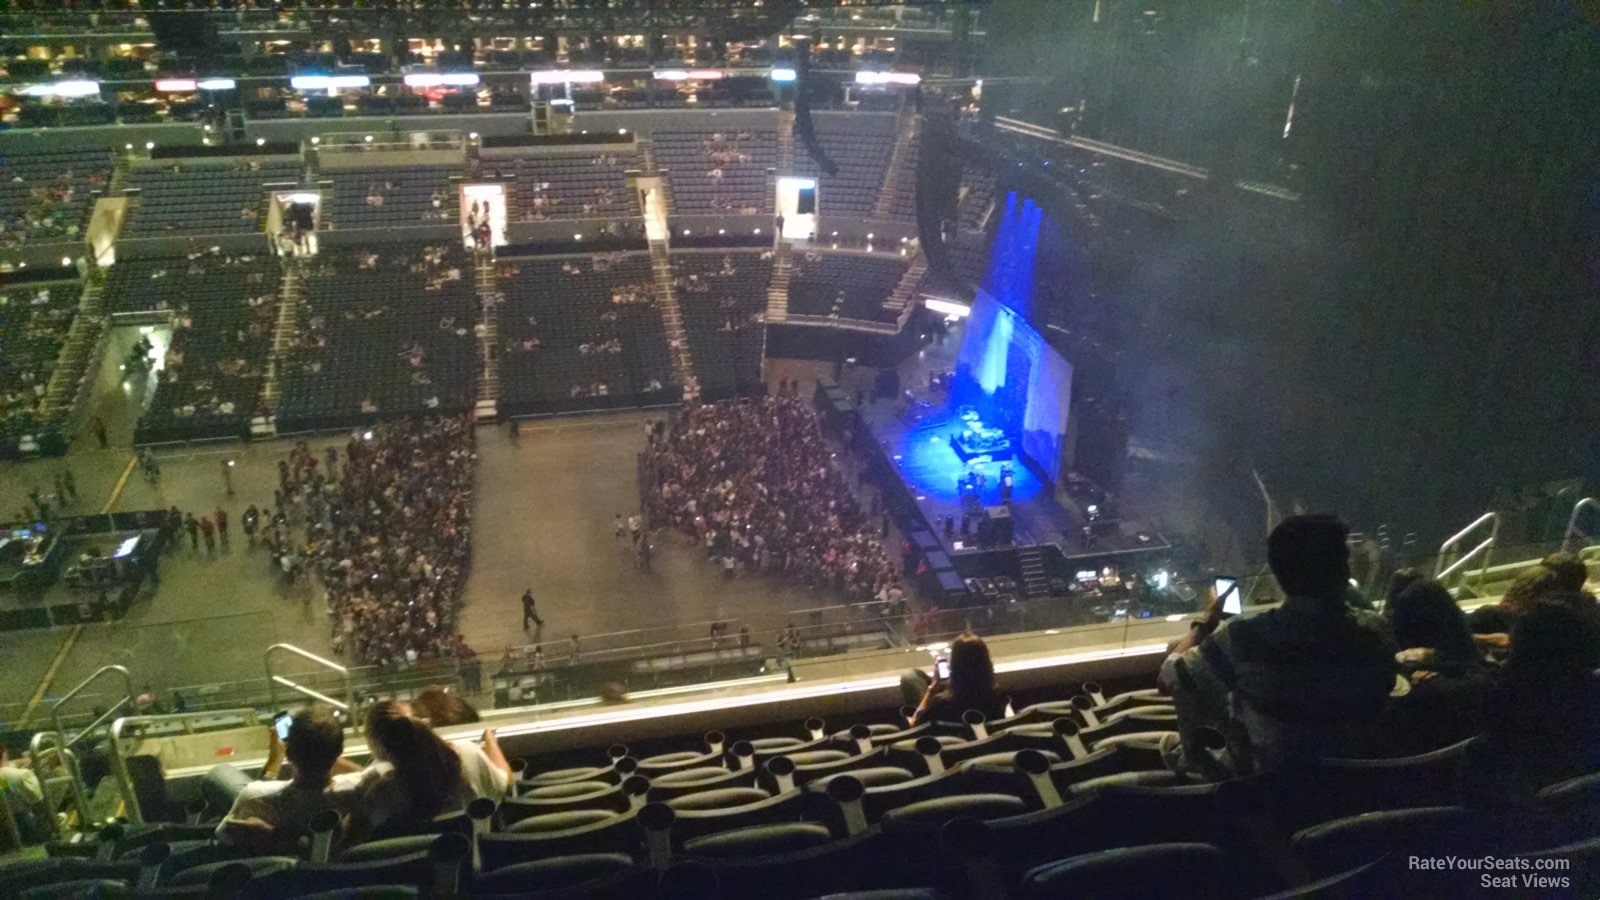 section 334, row 12 seat view  for concert - crypto.com arena